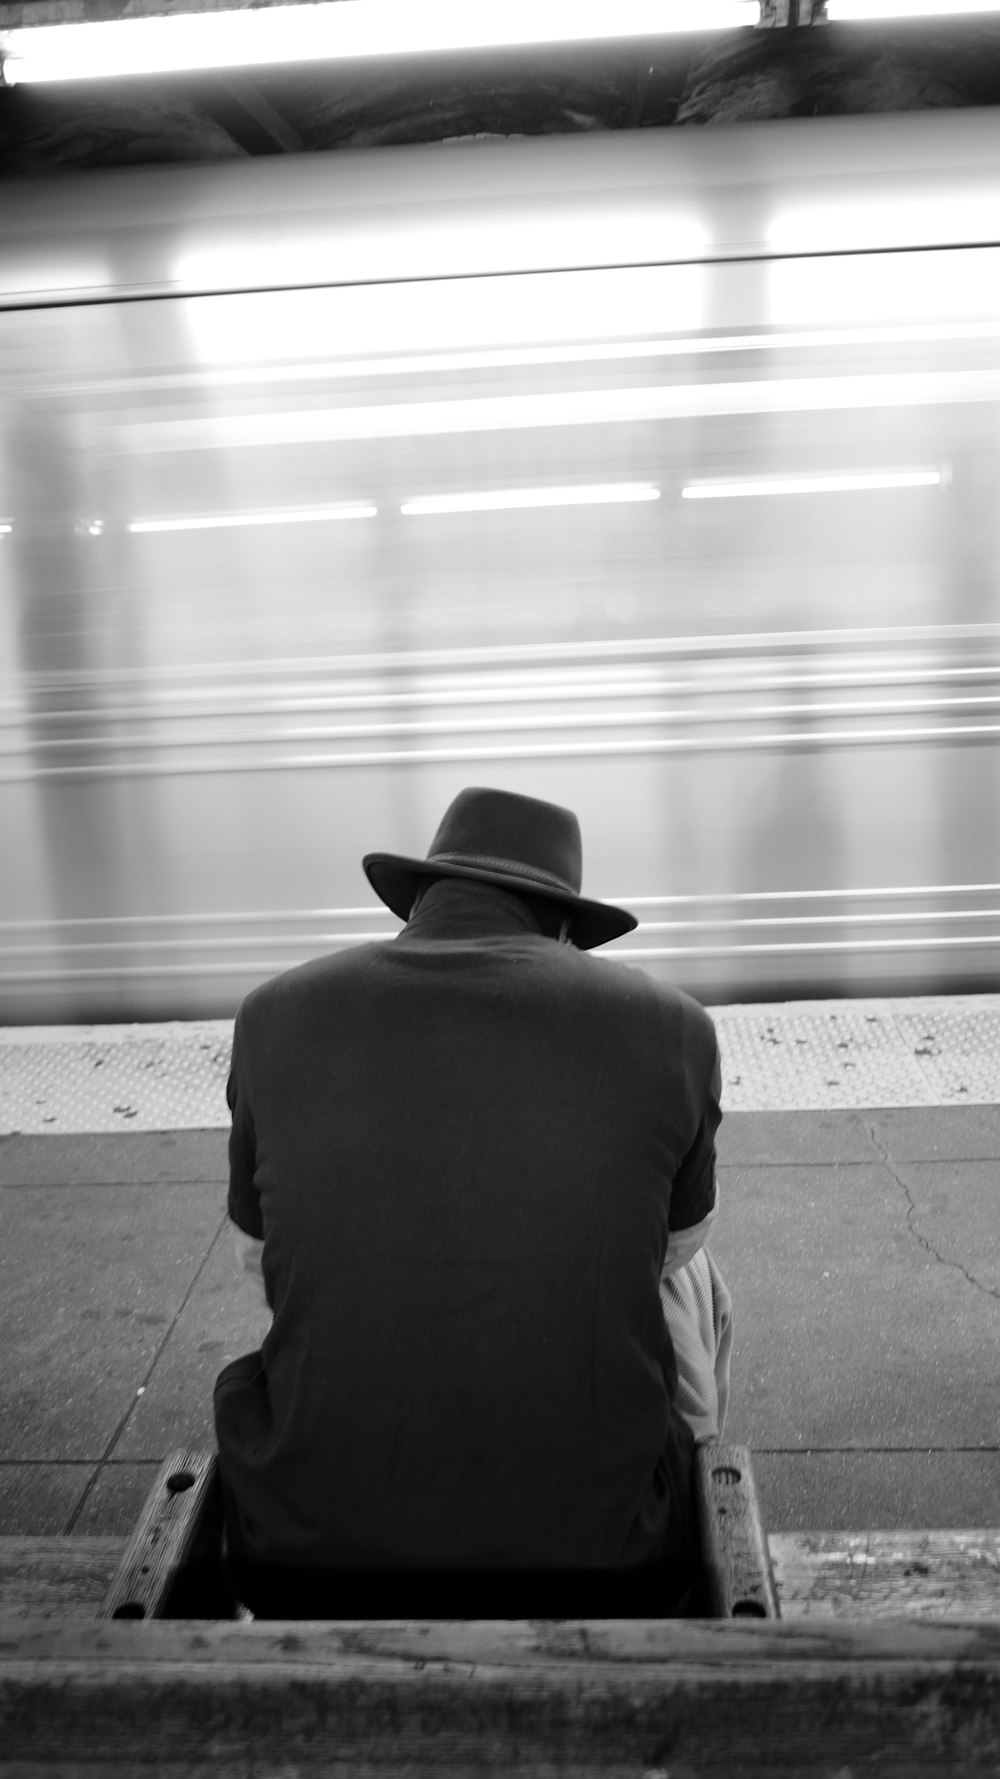 a person sitting on a bench looking at a train